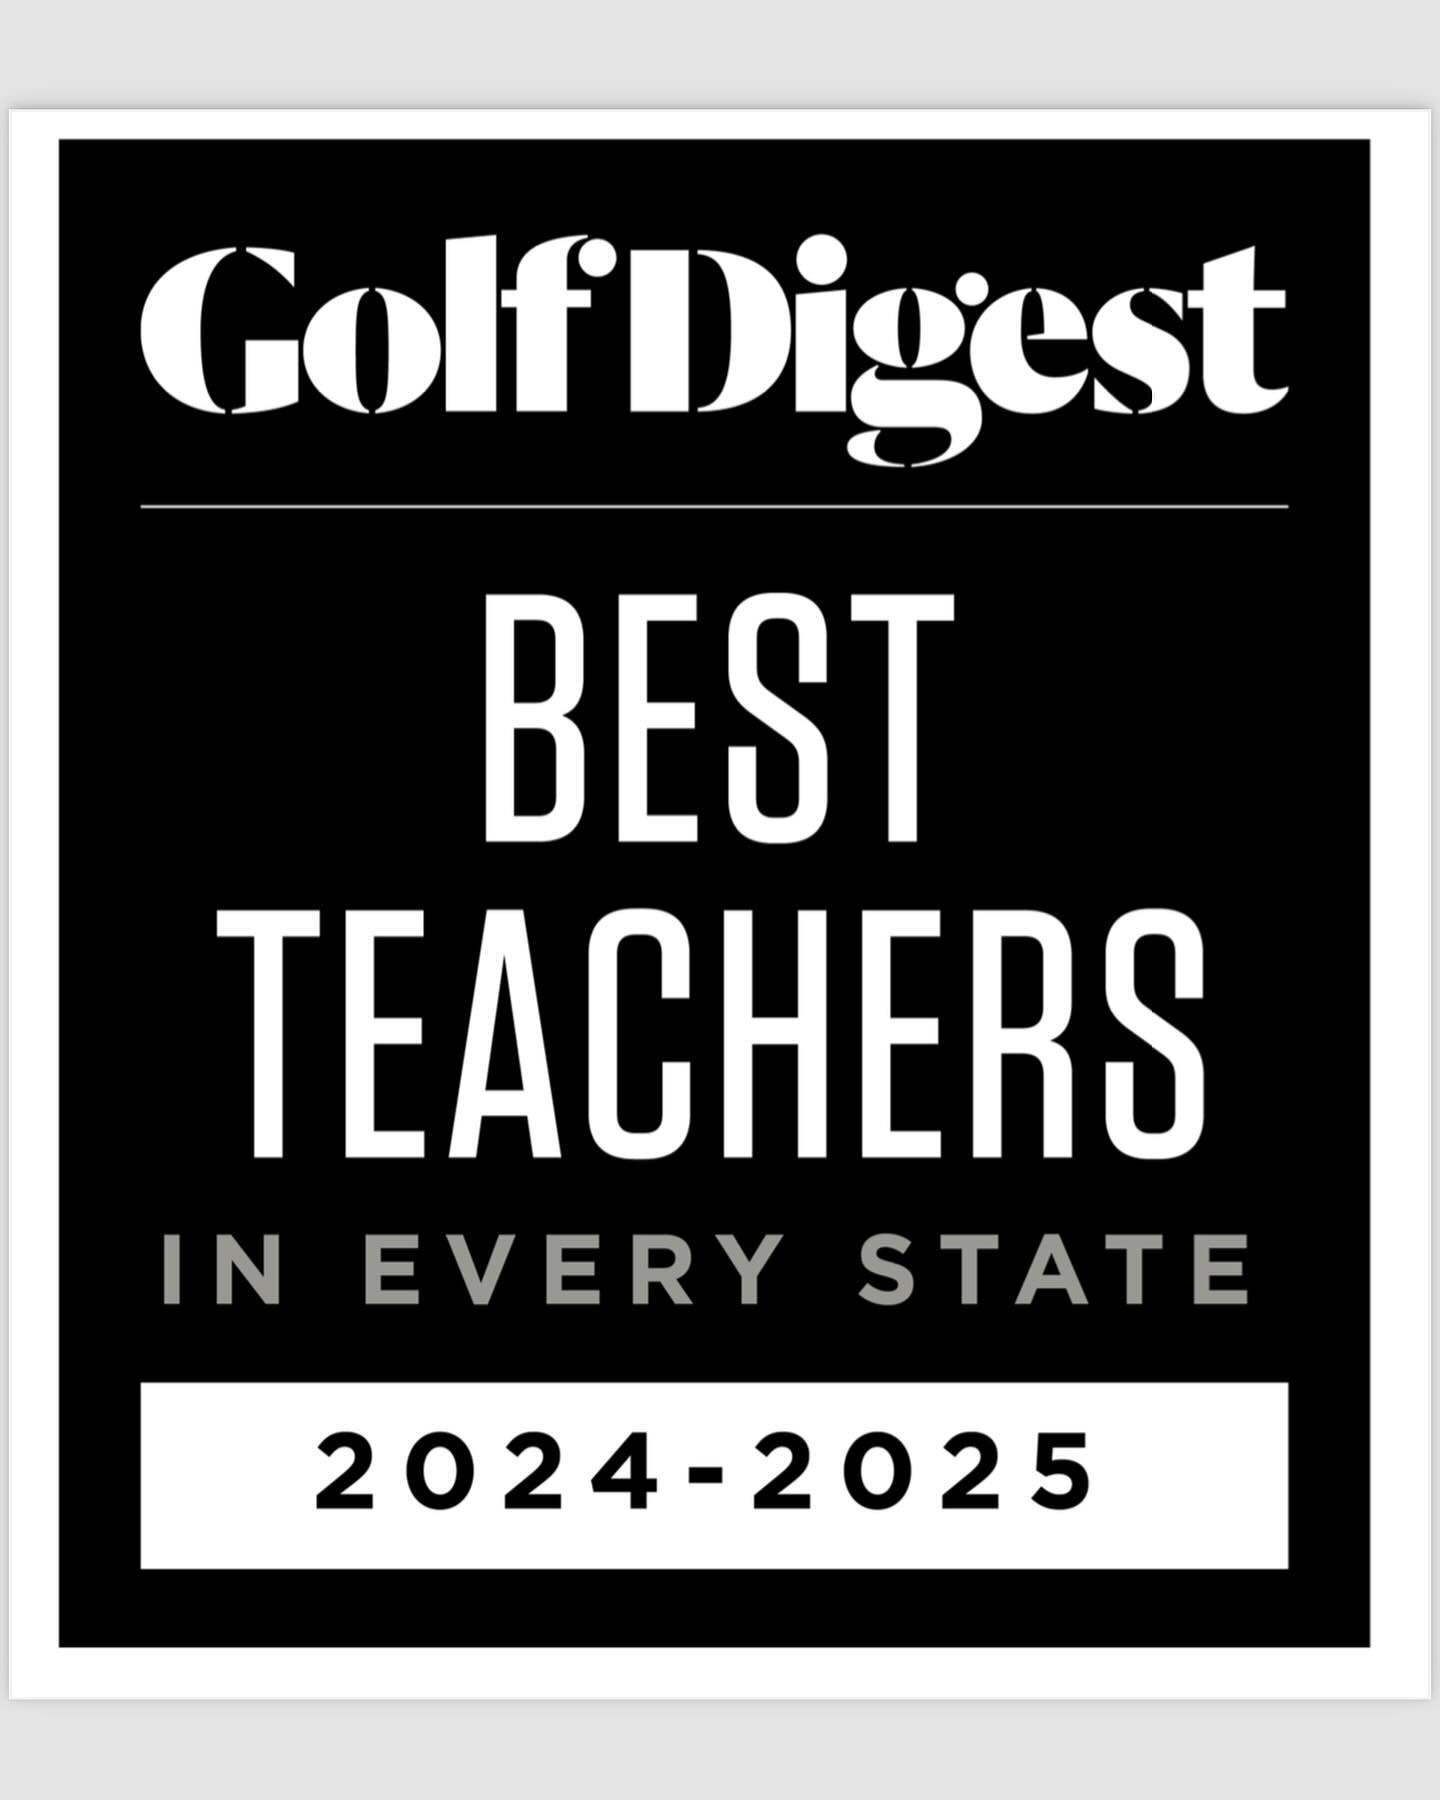 I am once again humbled to be recognized by @golfdigest as one of Top Teachers in Illinois.  Being a Chicago kid that was raised on the public links, this is a tremendous honor and one I do not take lightly. 

I truly wish to thank @matthewrudy, Ron 